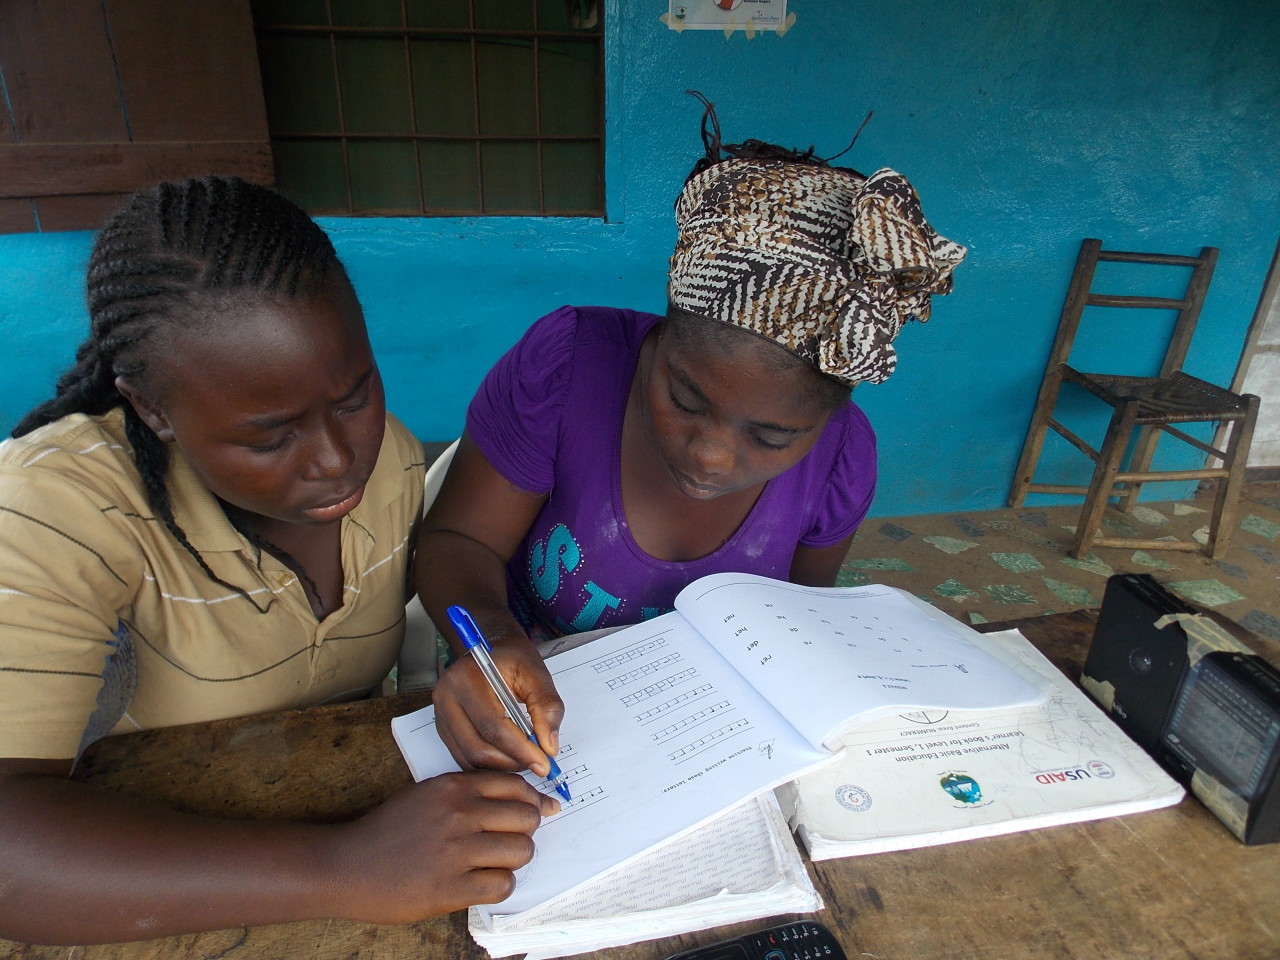 In Montserrado, Liberia, Vivian Dennis, right, works with her “study buddy,” Henrietta Sherman, in workbooks provided by the EDC-USAID education program now being broadcast on 10 community radio stations while schools are shut down due to Ebola. Her radio is to the right. (Courtesy EDC)